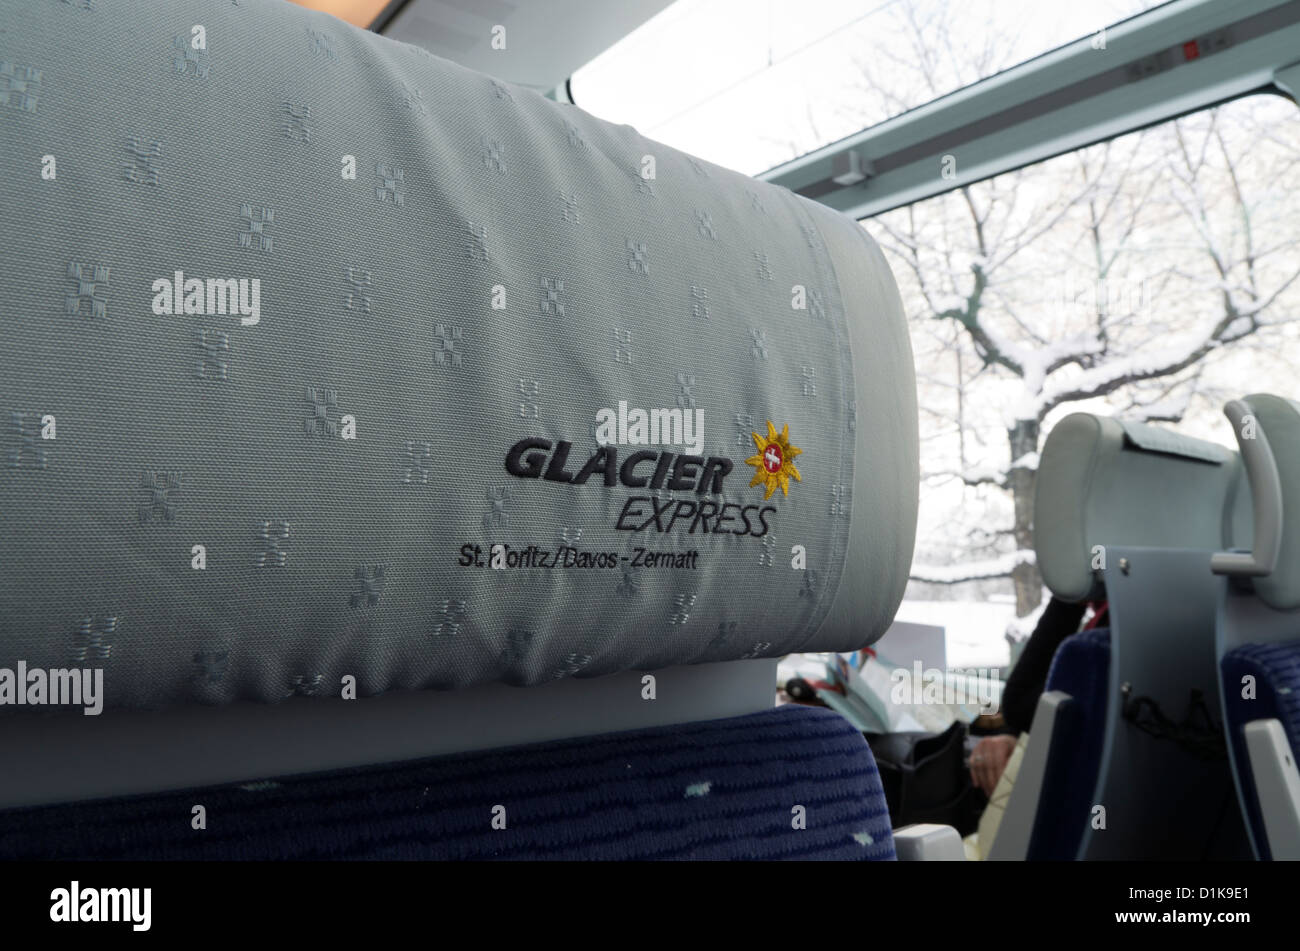 View of headrest and logo inside the Glacier Express Train as it travels between Andermatt and Brig in Switzerland. Stock Photo